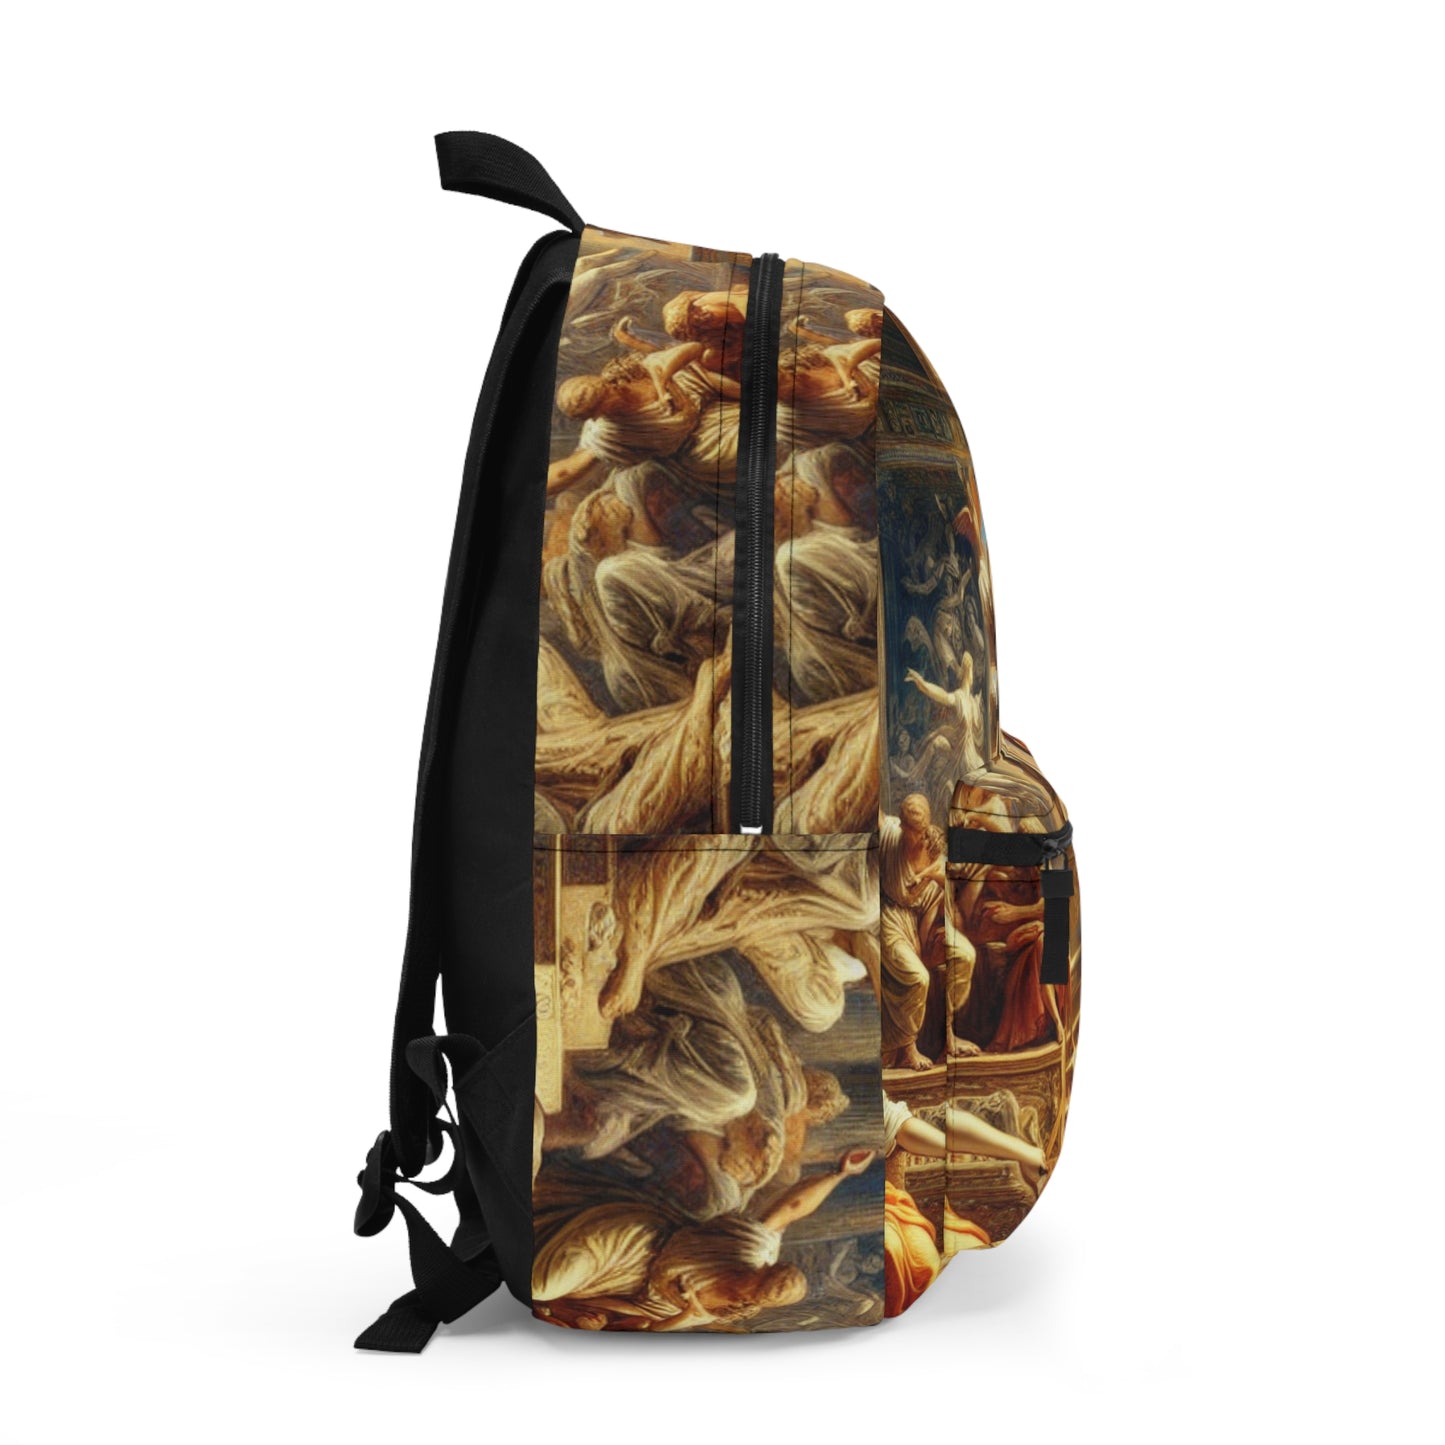 "Modern Renaissance: Leaders of Today" - The Alien Backpack Neoclassicism